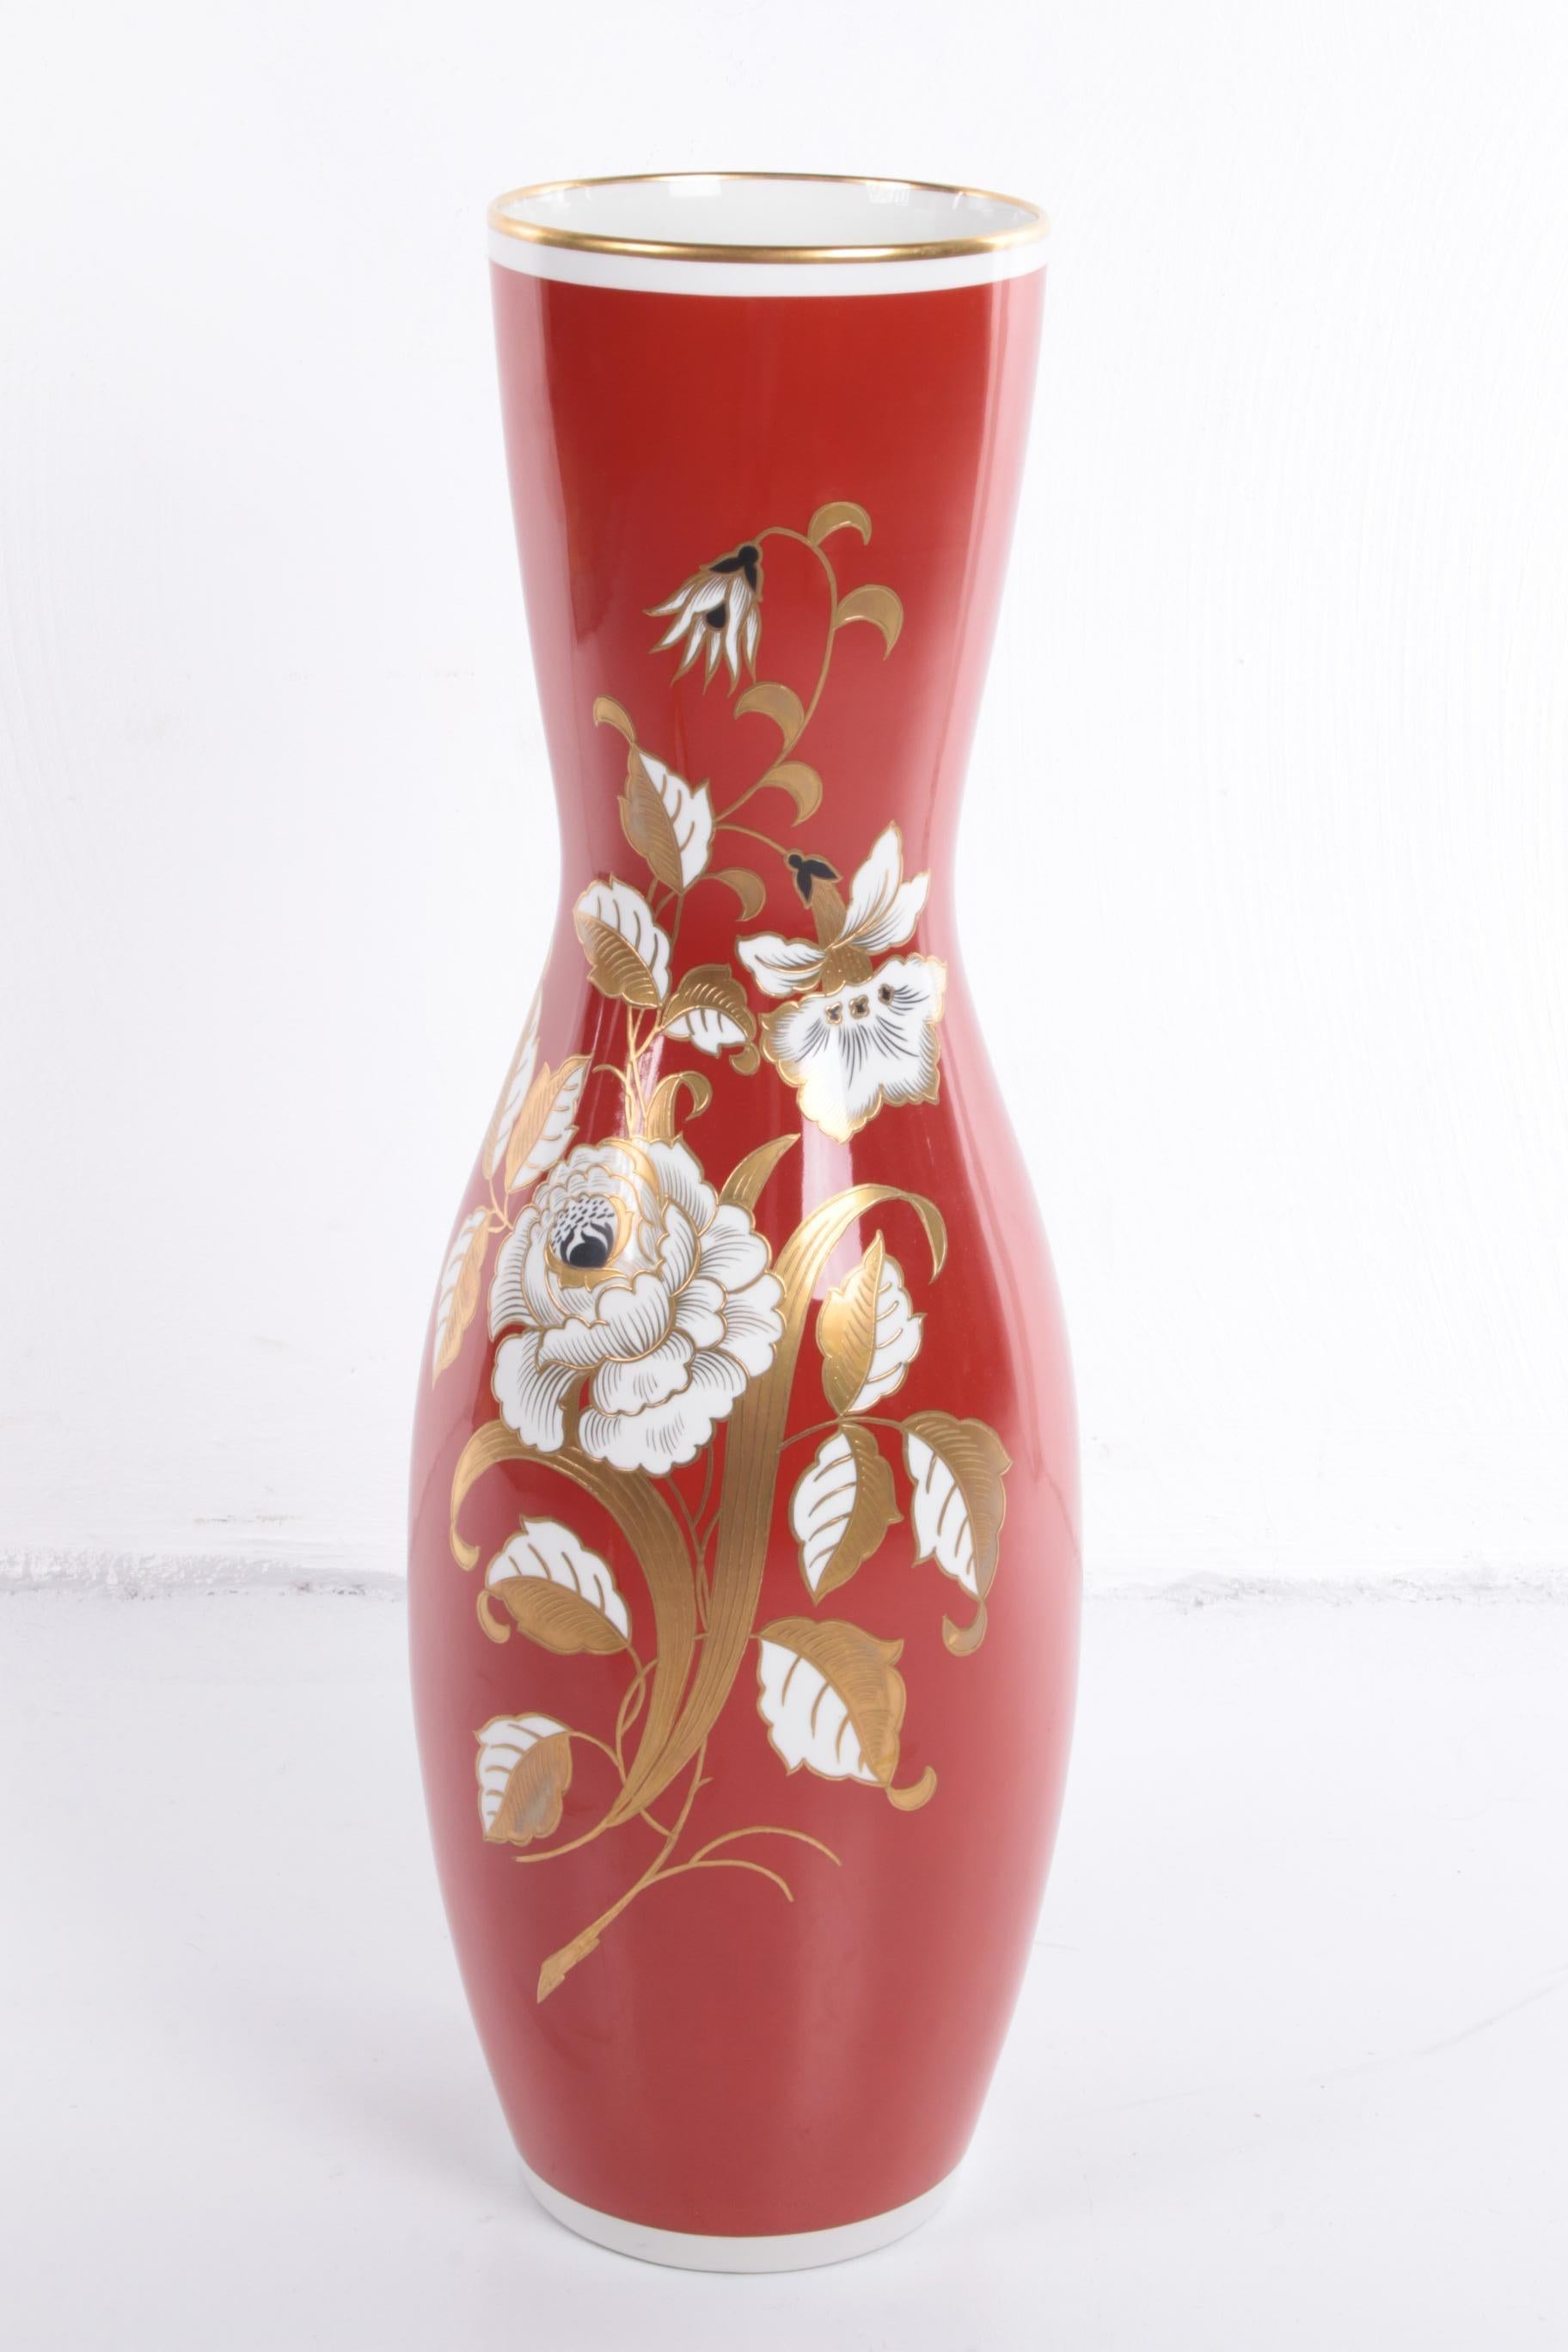 Large red porcelain vase with golden flowers VEB Wallendorfer

A rare large beautiful hand-painted vase,

From the German Porcelain factory Wallendorf 1966 to Heden,

The vase has a beautiful red color with golden flowers,

Weight 10 kg.